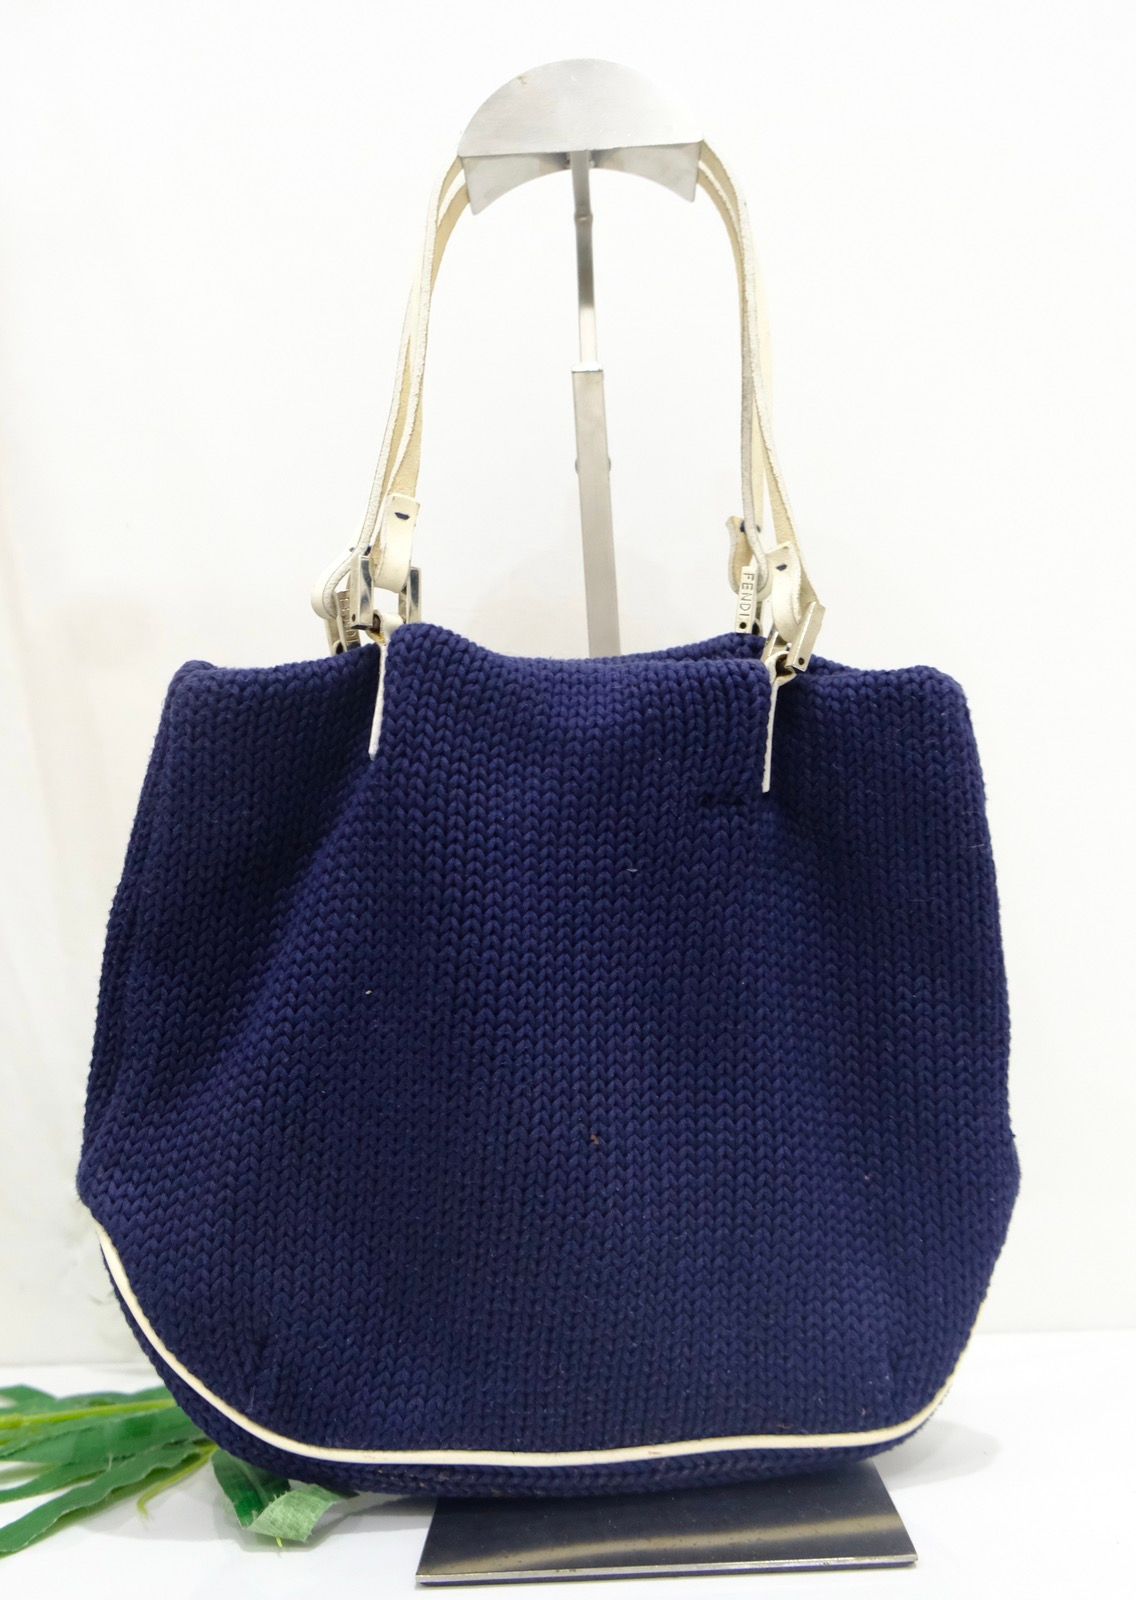 Authentic vintage Fendi navy knitted tote bag - 2